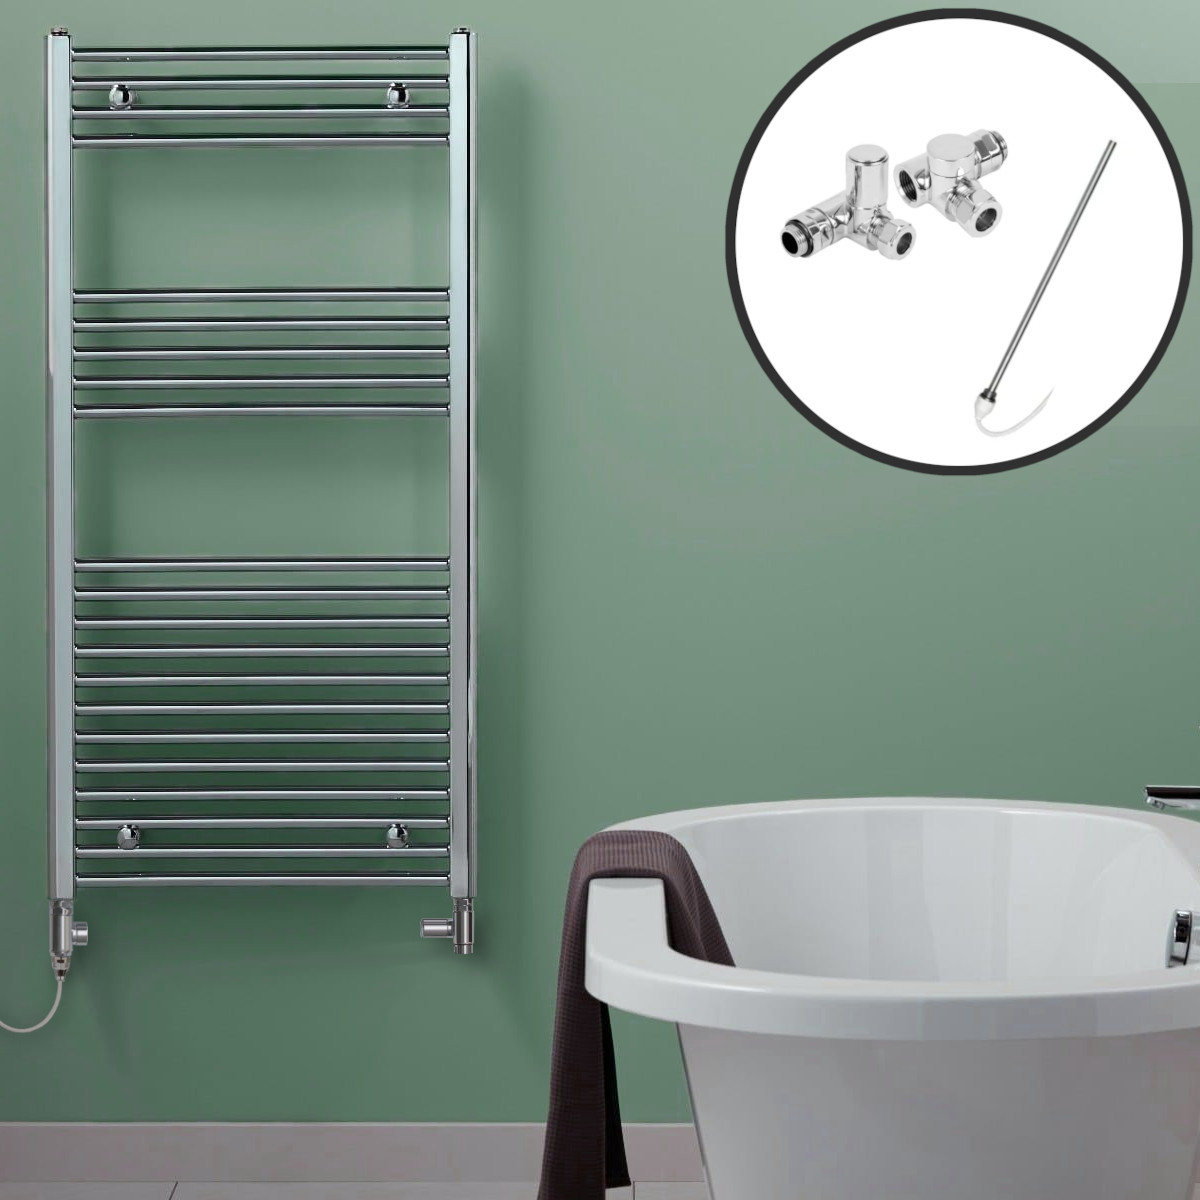 Bray Straight Flat Heated Towel Rail / Warmer / Radiator, Chrome – Dual Fuel Best Quality & Price, Energy Saving / Economic To Run Buy Online From Adax SolAire UK Shop 2